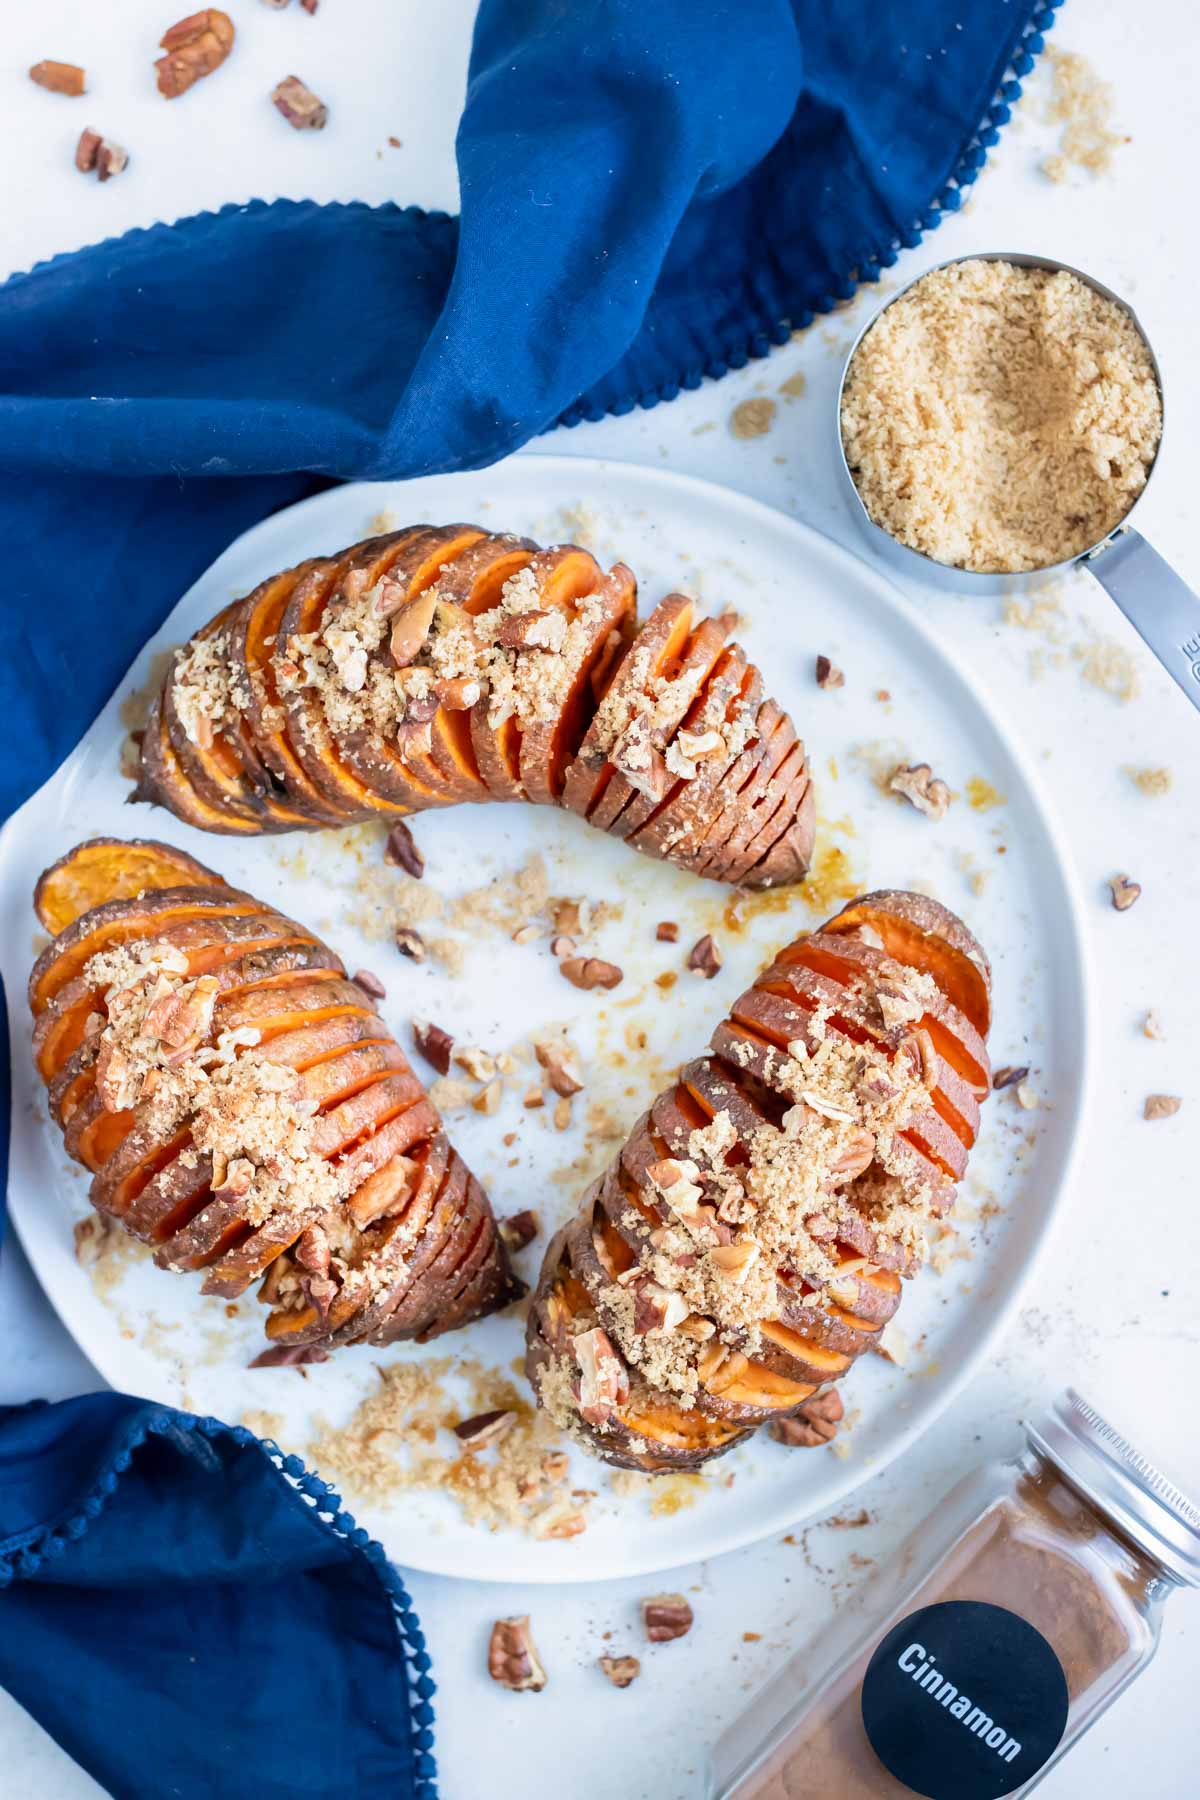 Hasselback Sweet Potatoes are sliced and roasted before being served on a plate.